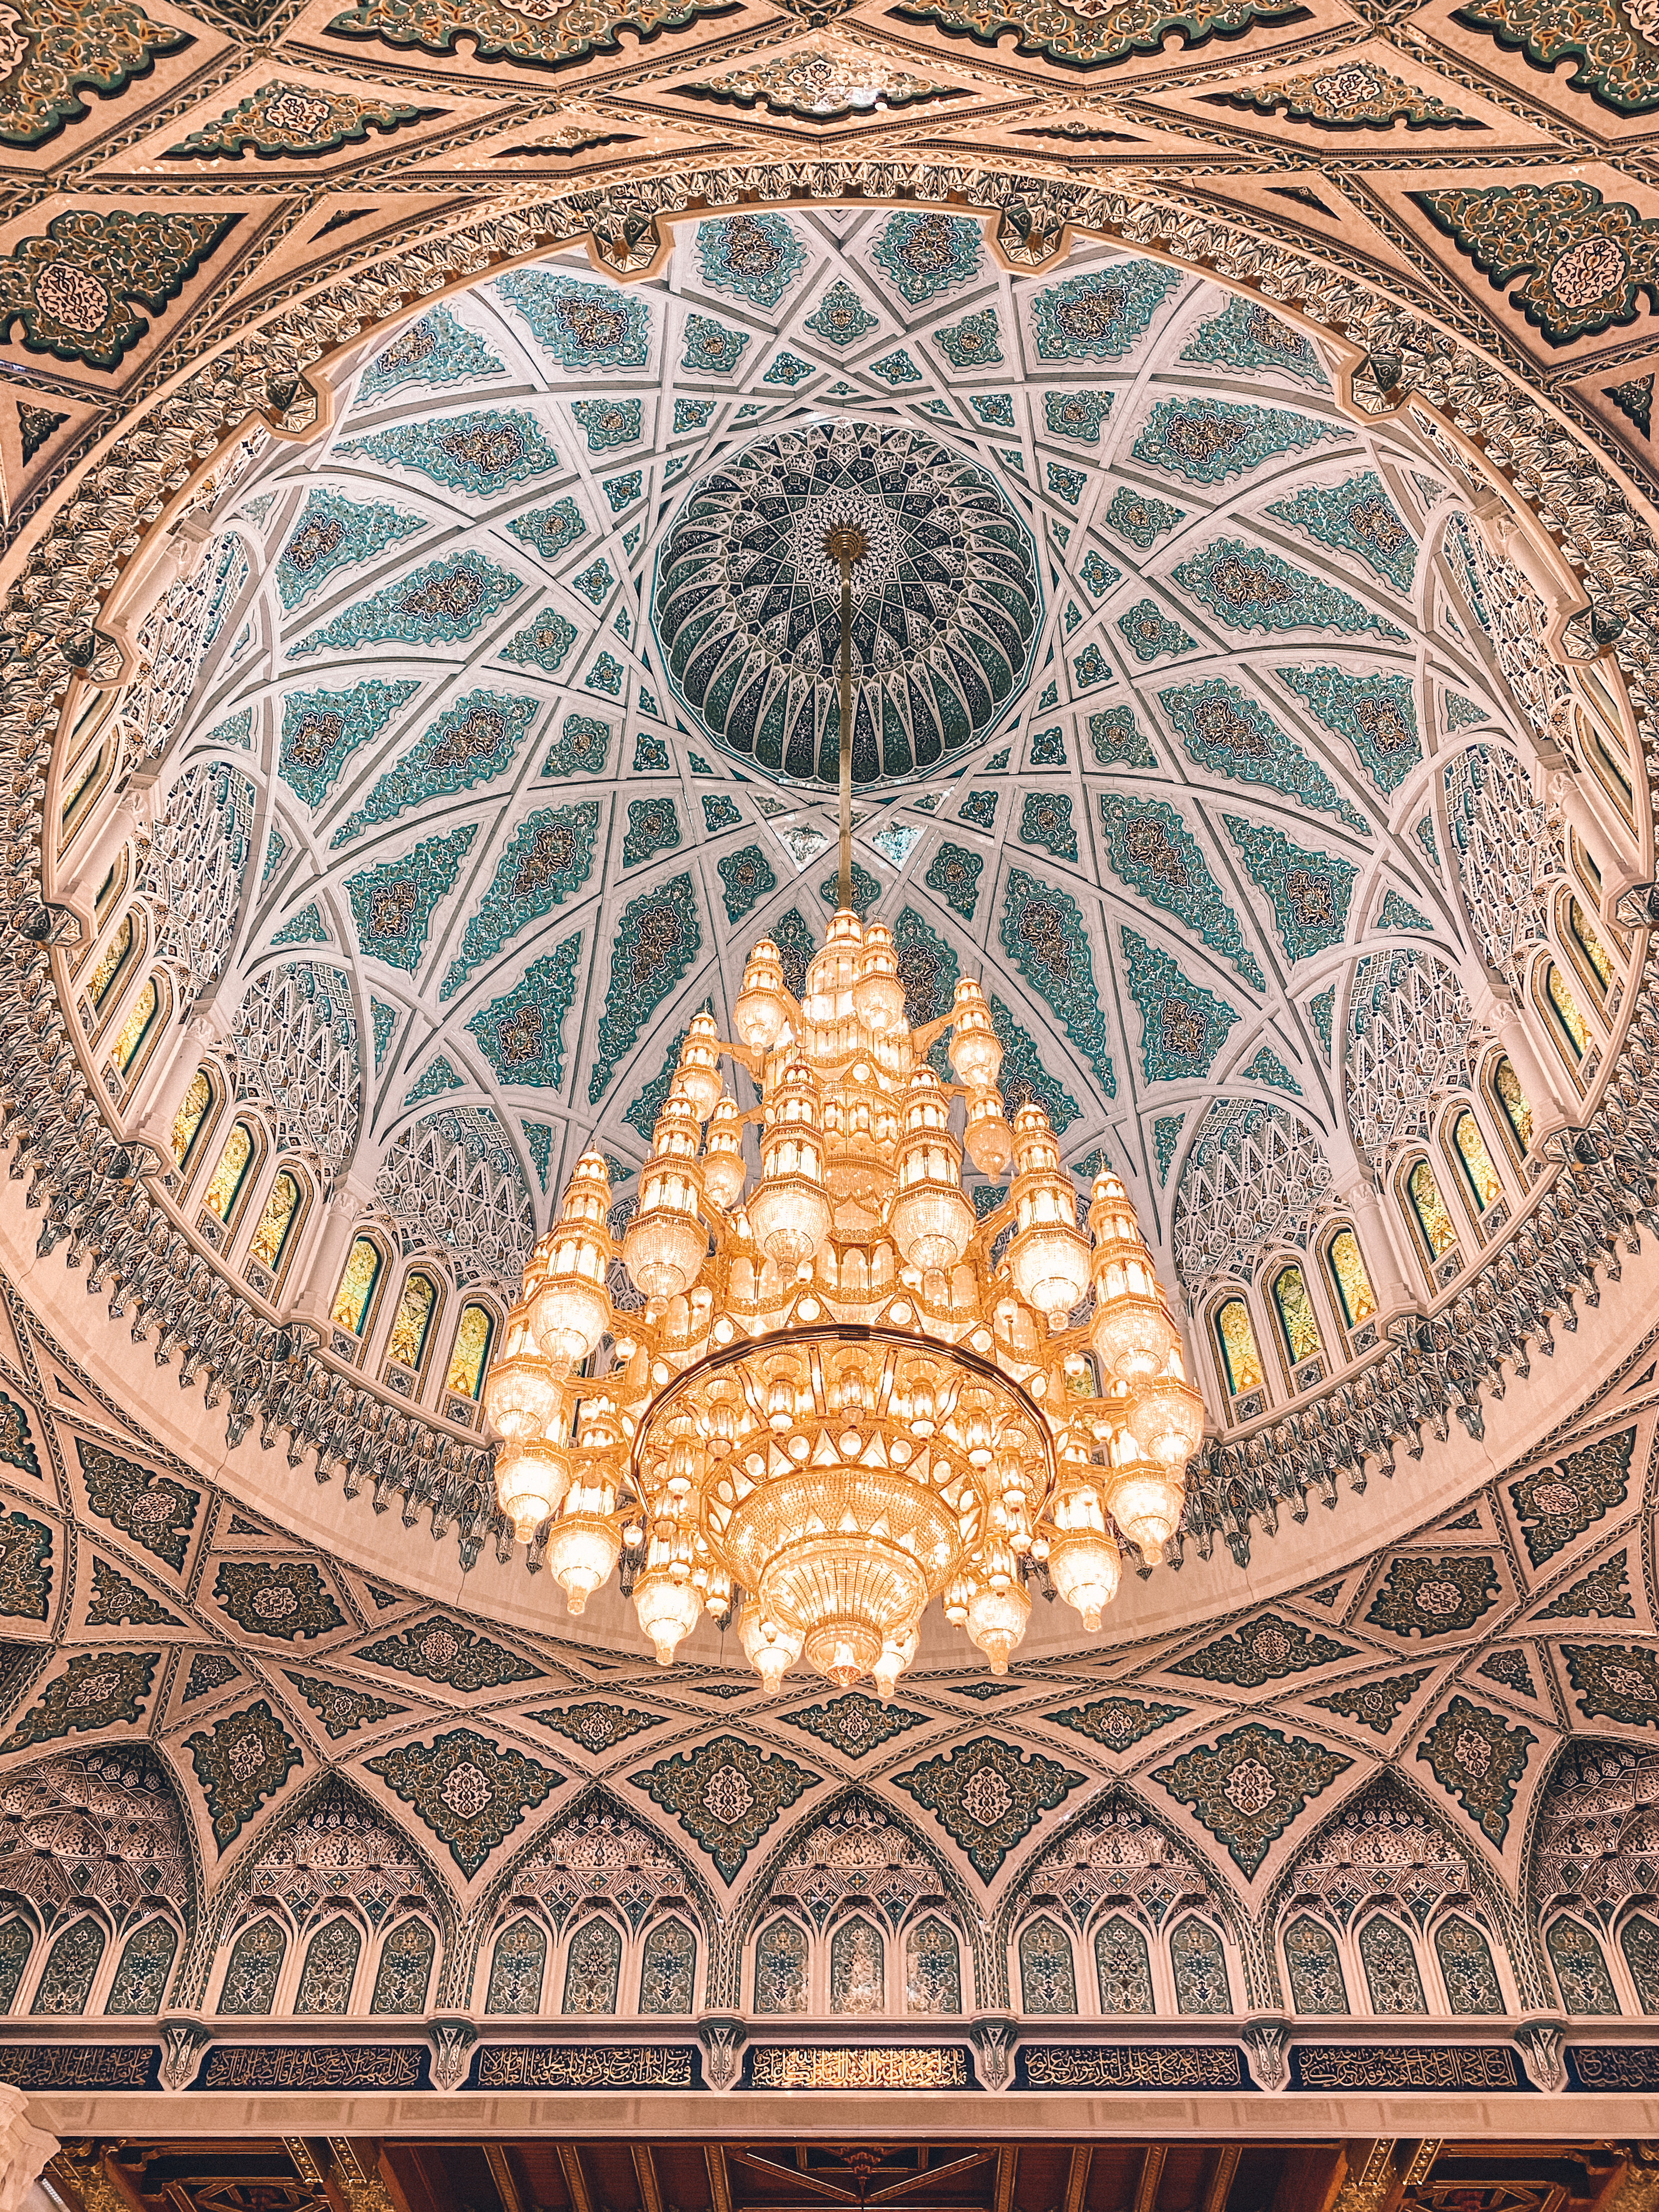 Chandelier and decorative dome inside the Sultan Qaboos Mosque